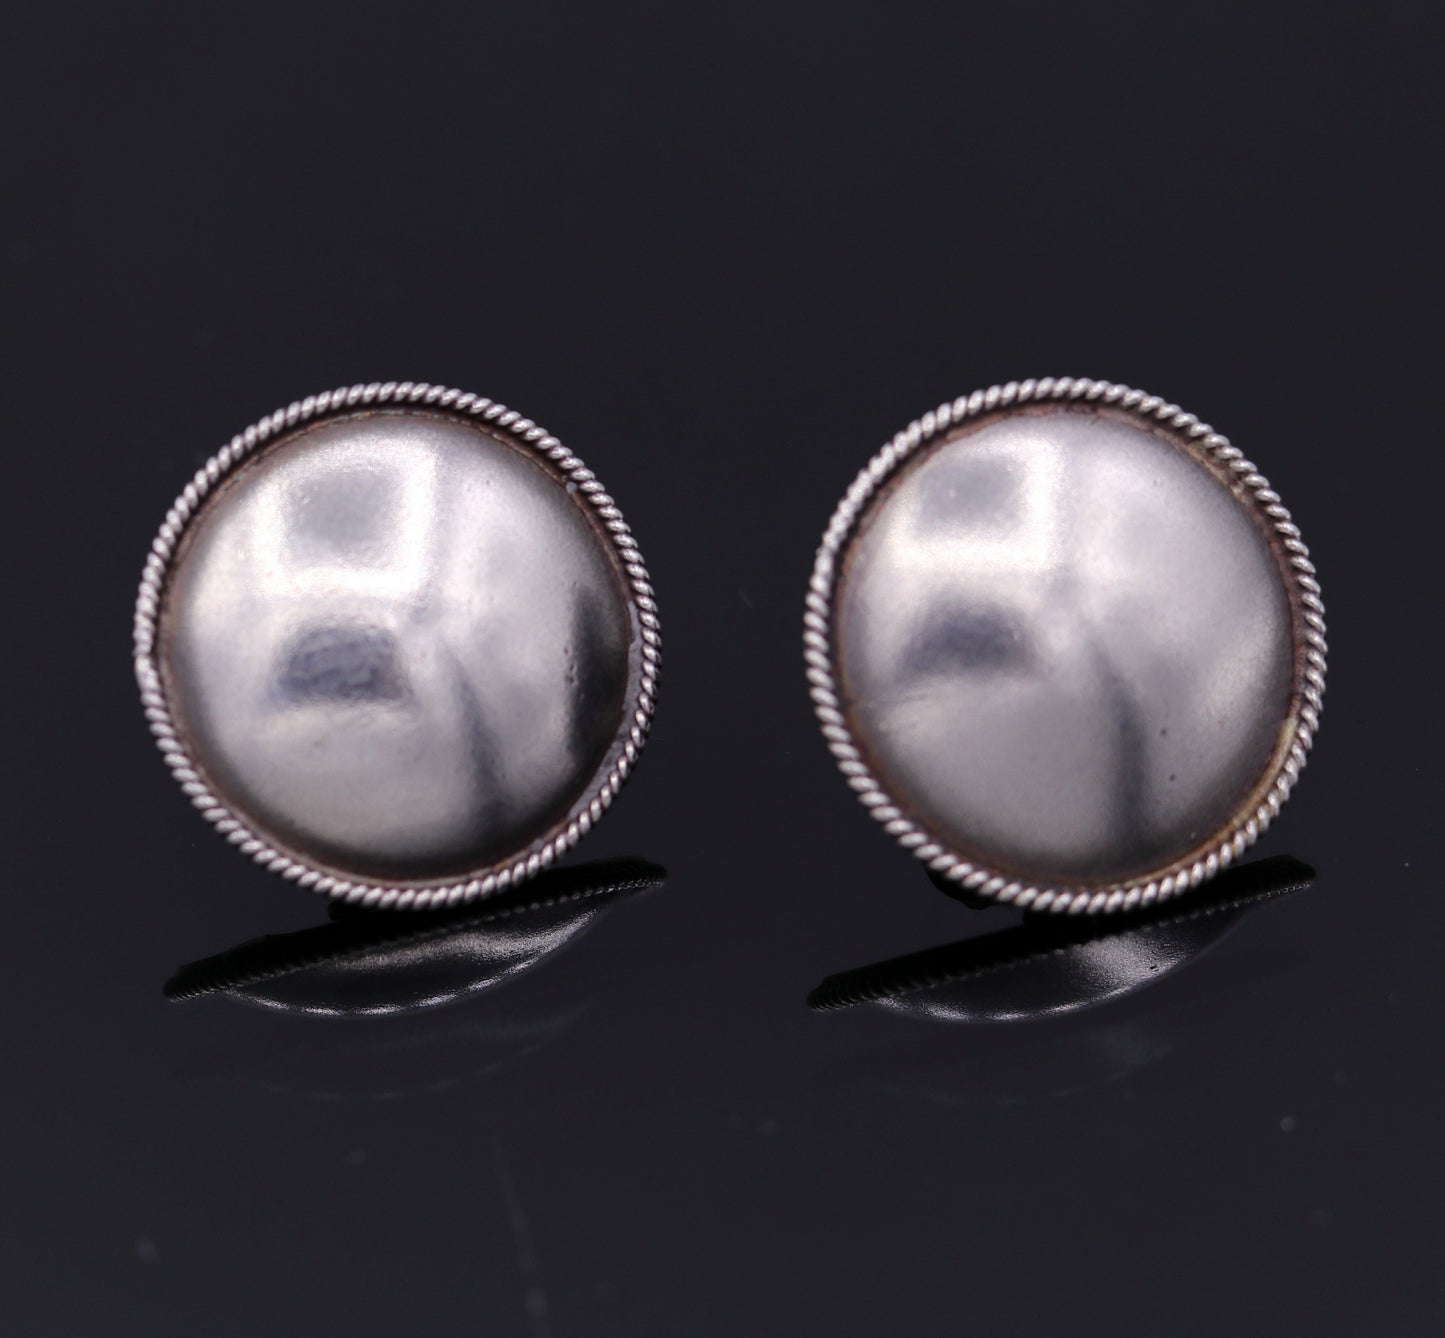 High quality 925 sterling silver plain style handmade round design fabulous Stud earrings tribal jewelry from Rajasthan india  s526 - TRIBAL ORNAMENTS